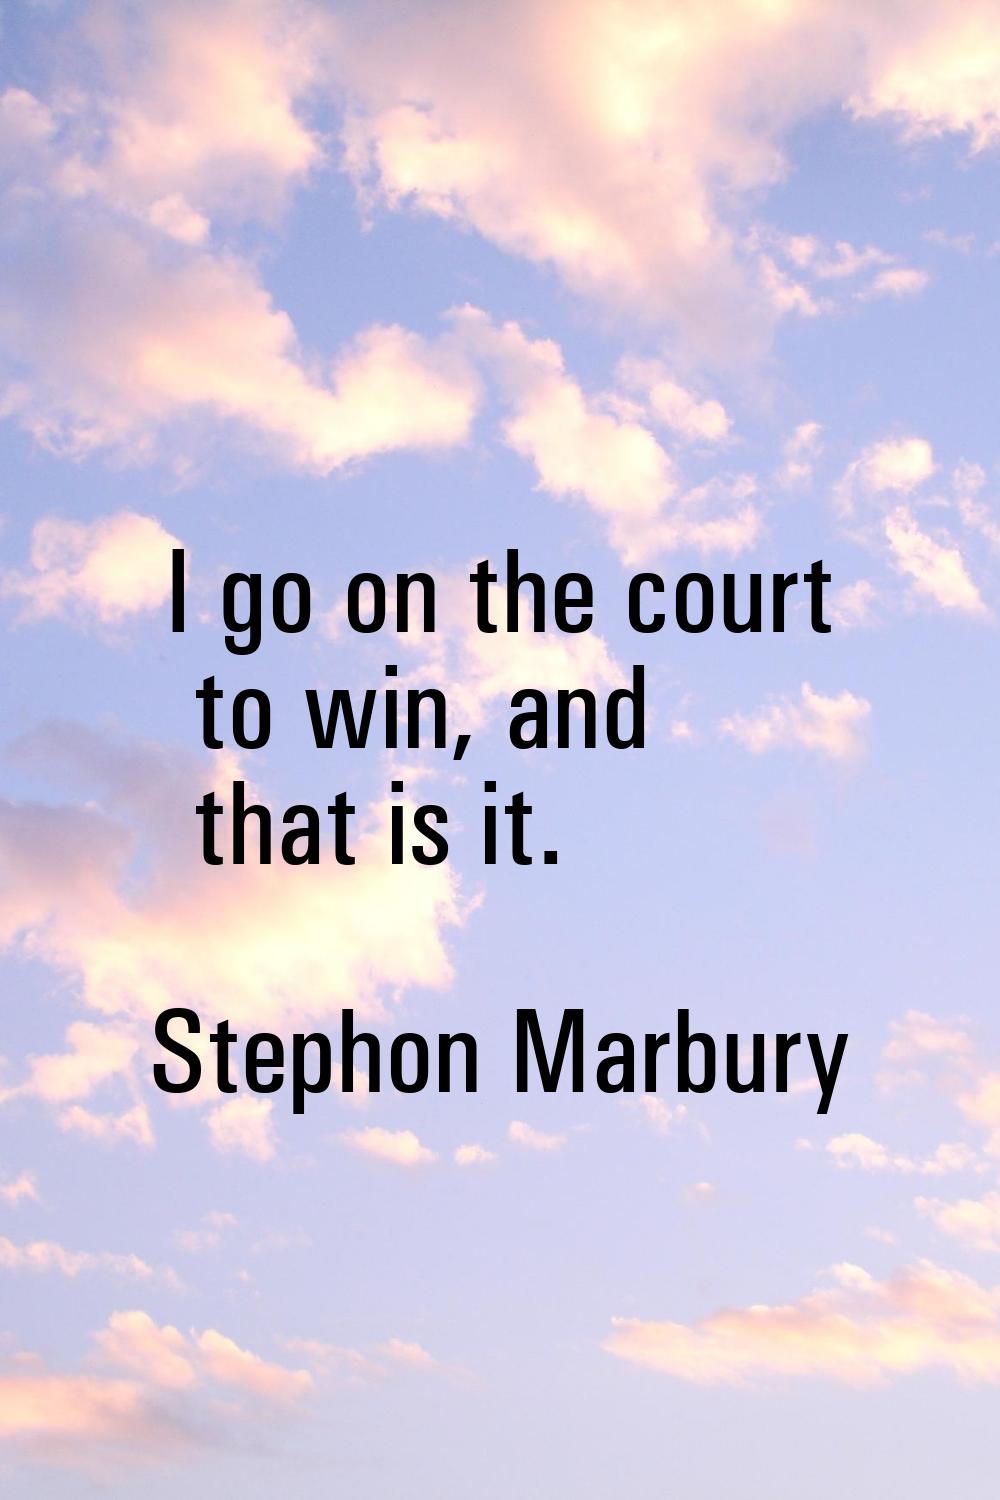 I go on the court to win, and that is it.